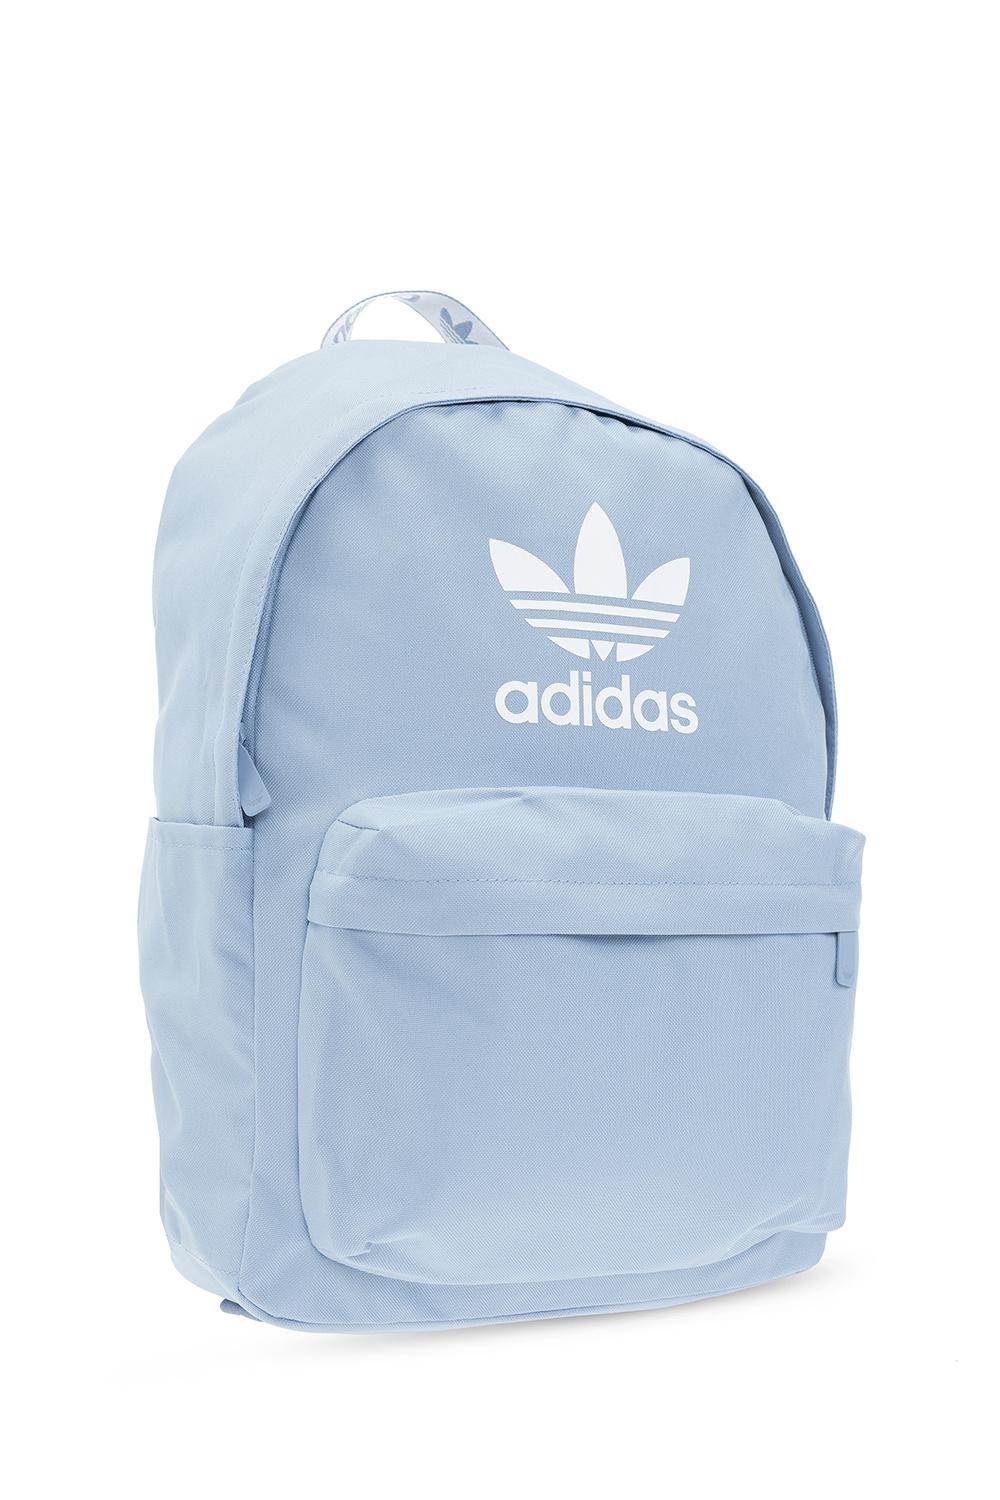 adidas Originals Backpack With Logo in Blue for Men | Lyst UK